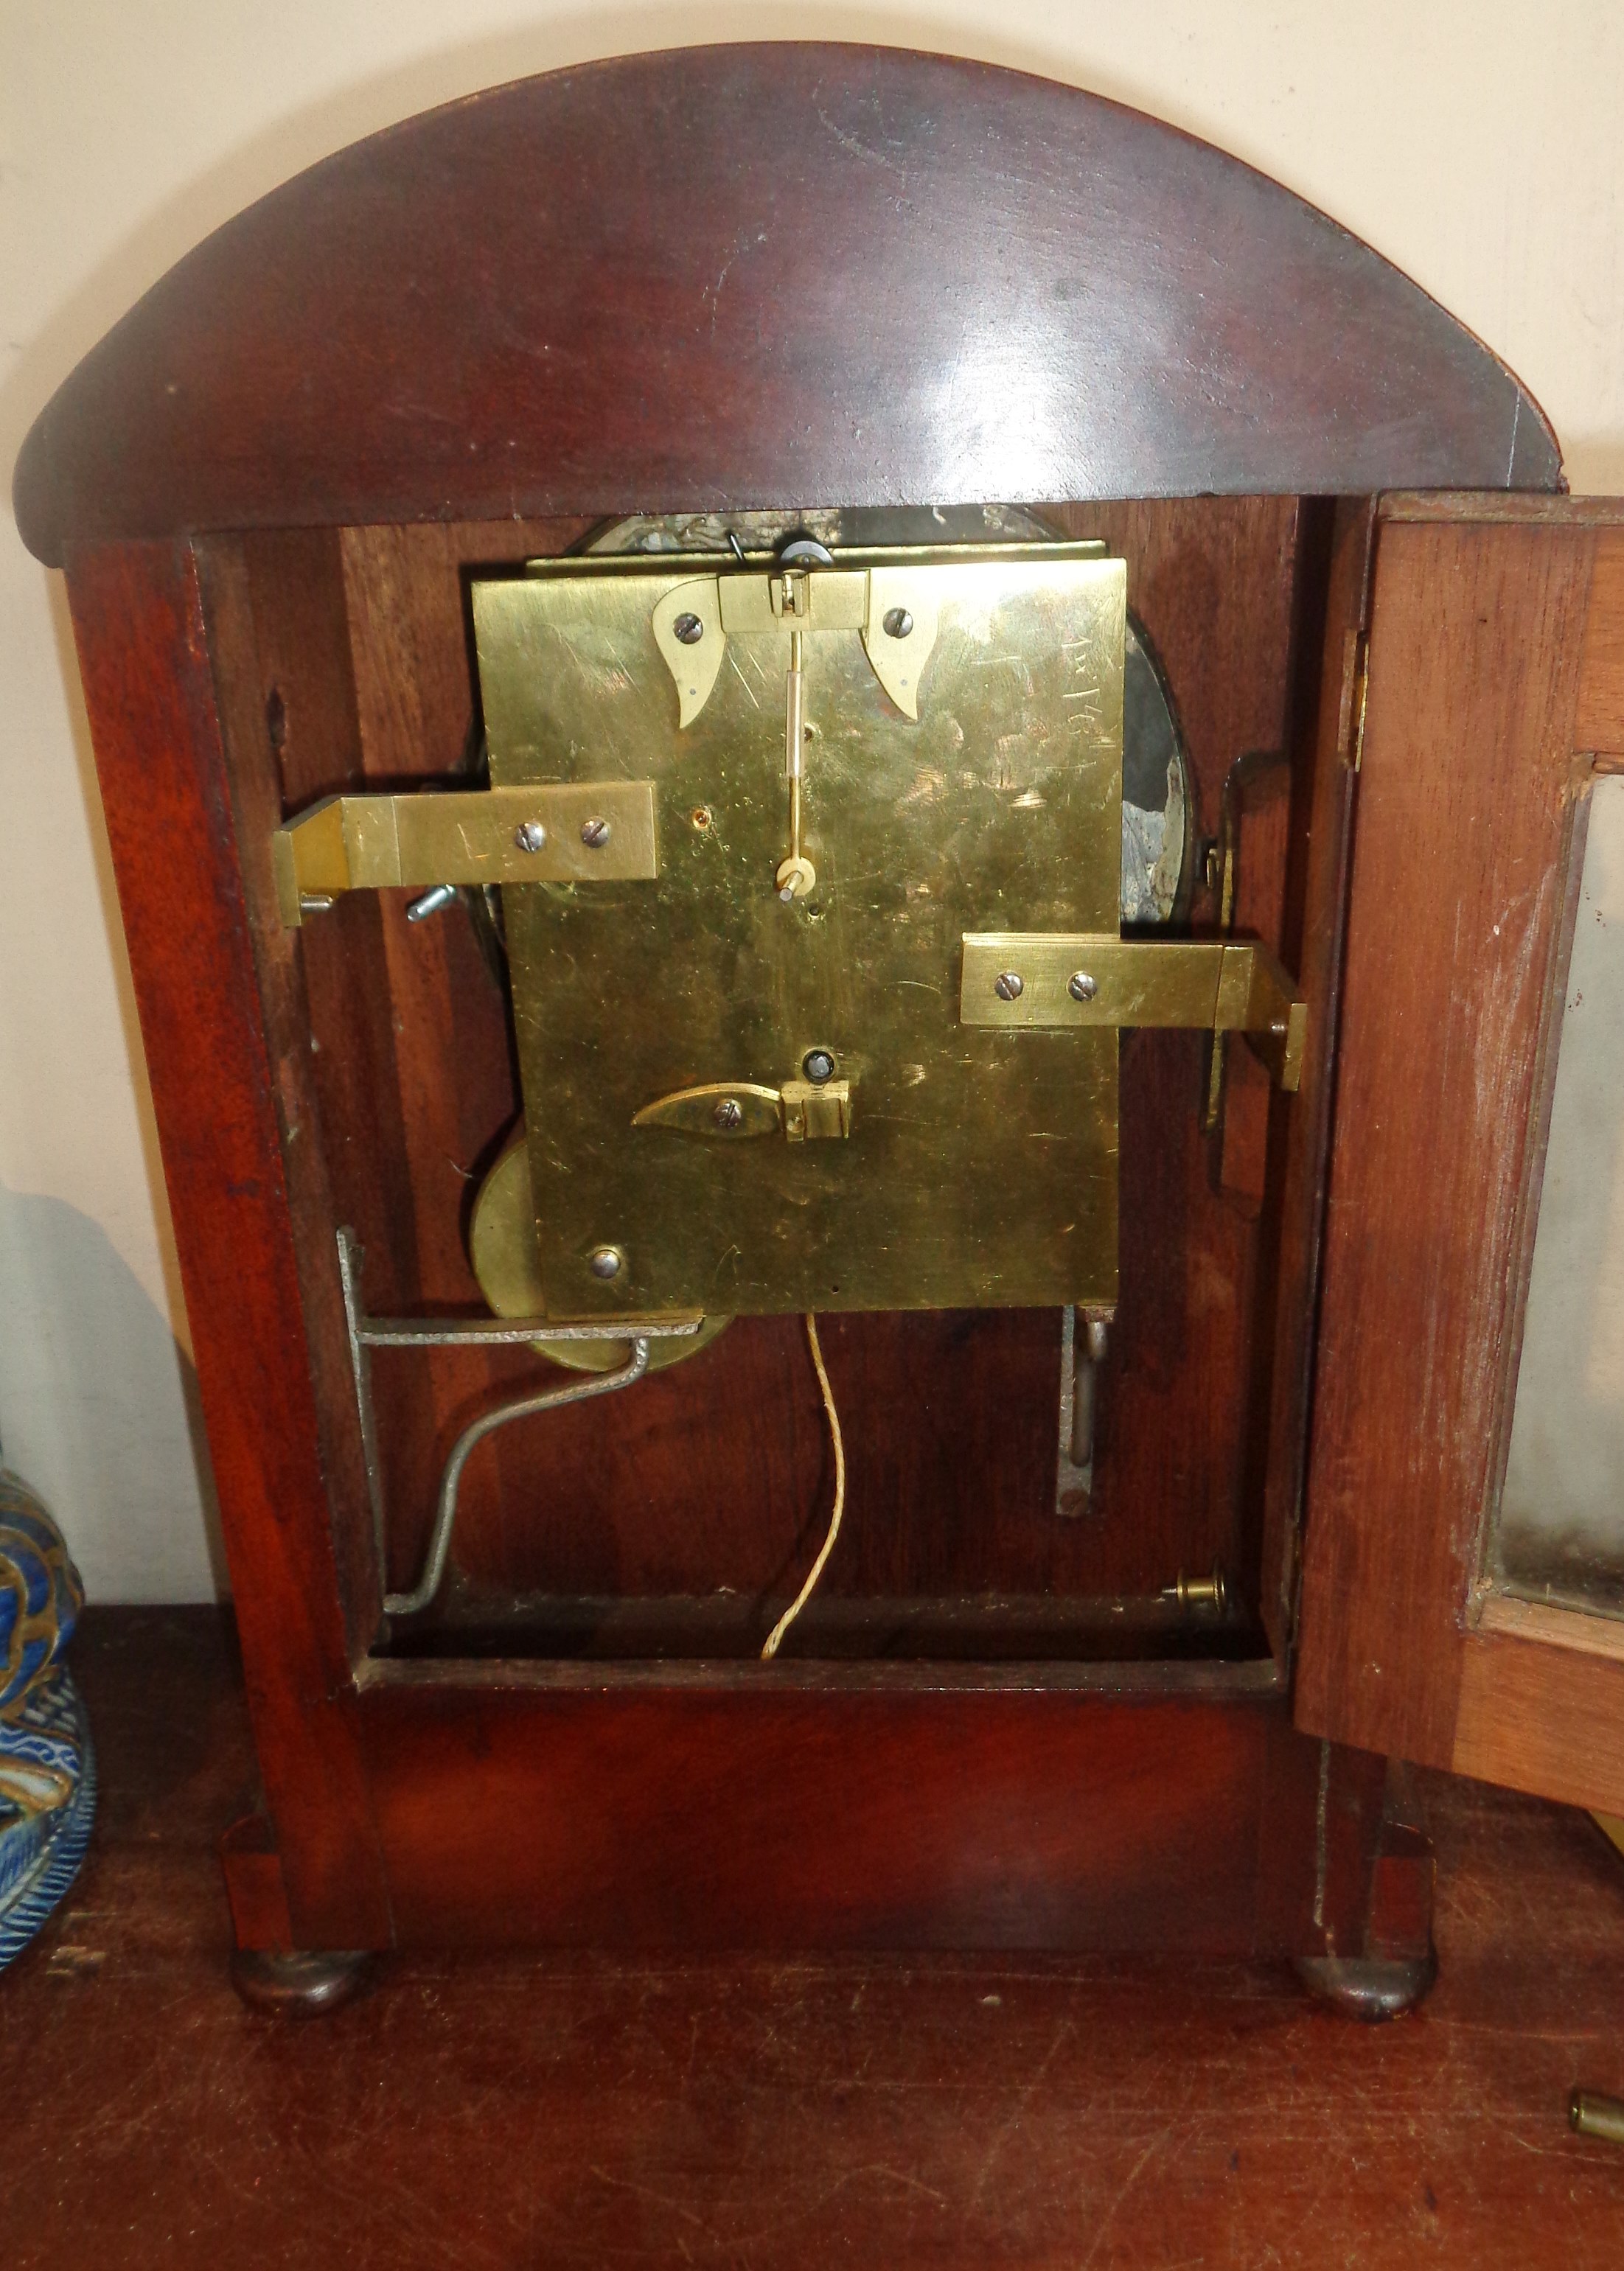 19th c. bracket clock with fusee movement in dome topped flame mahogany case - Image 2 of 2